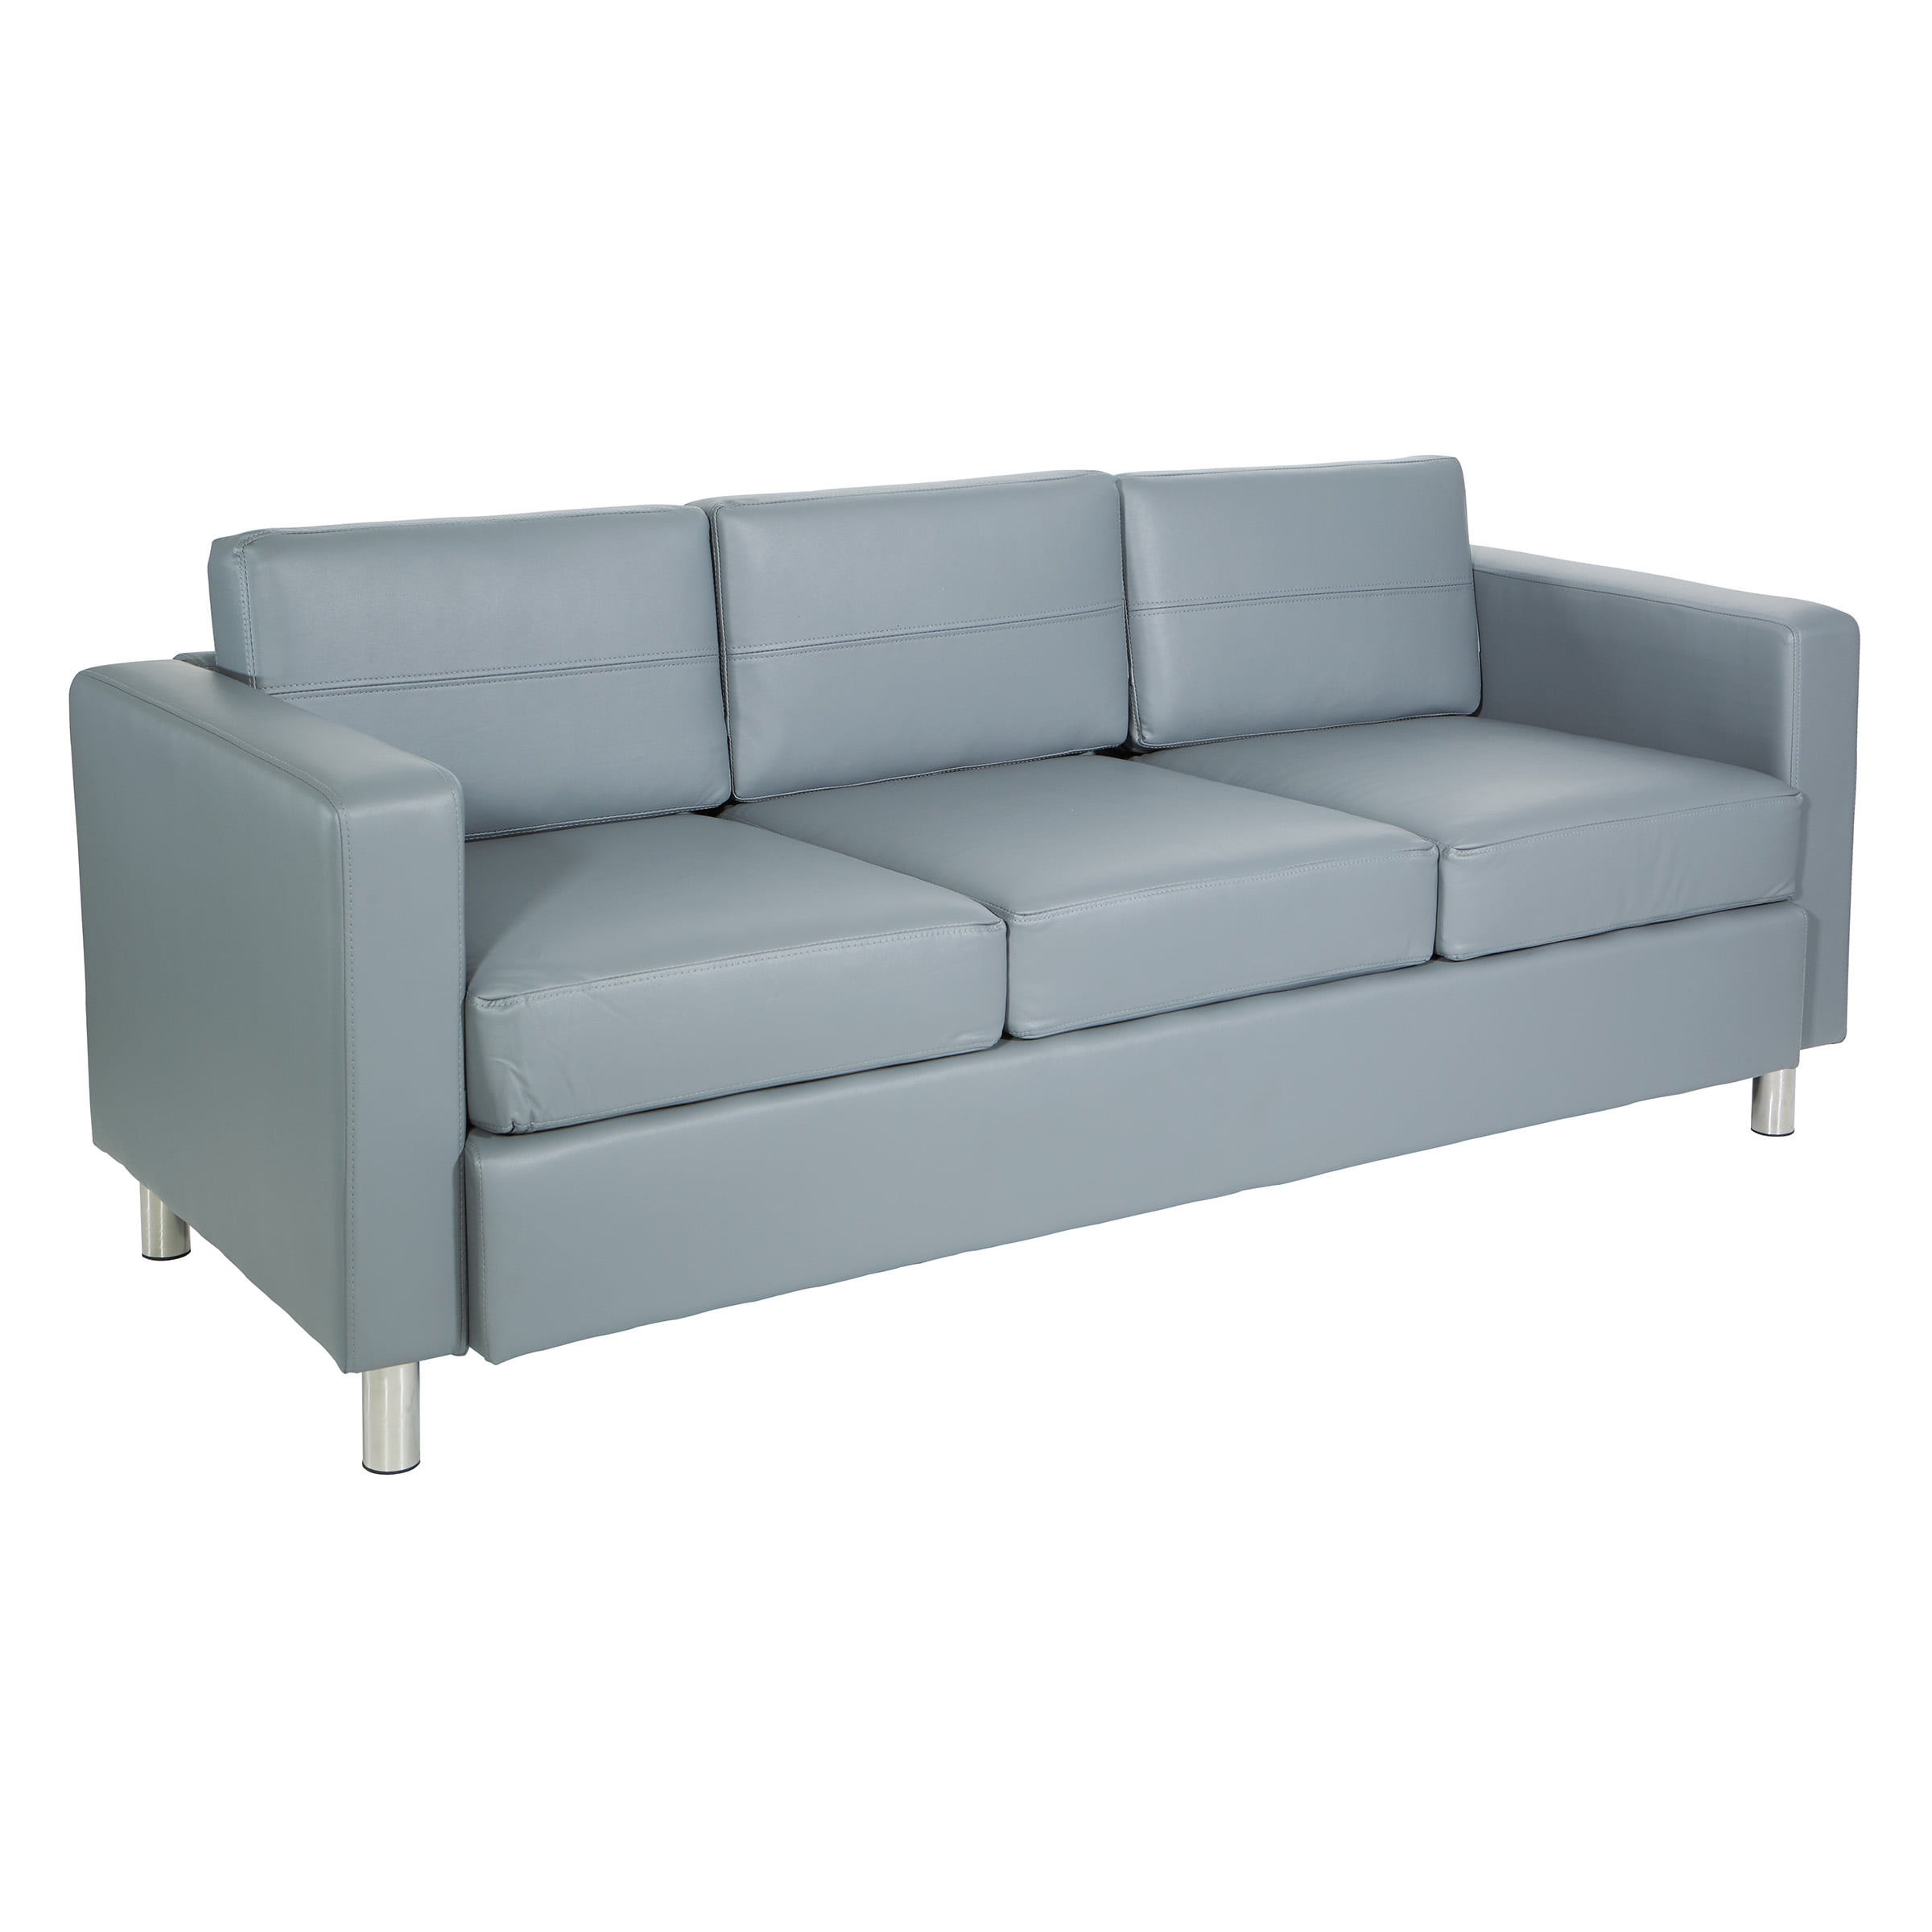 Spring Seats Color Faux Silver and Legs Box Sofa Home Pacific OSP with Couch Charcoal Furnishings Grey in Leather